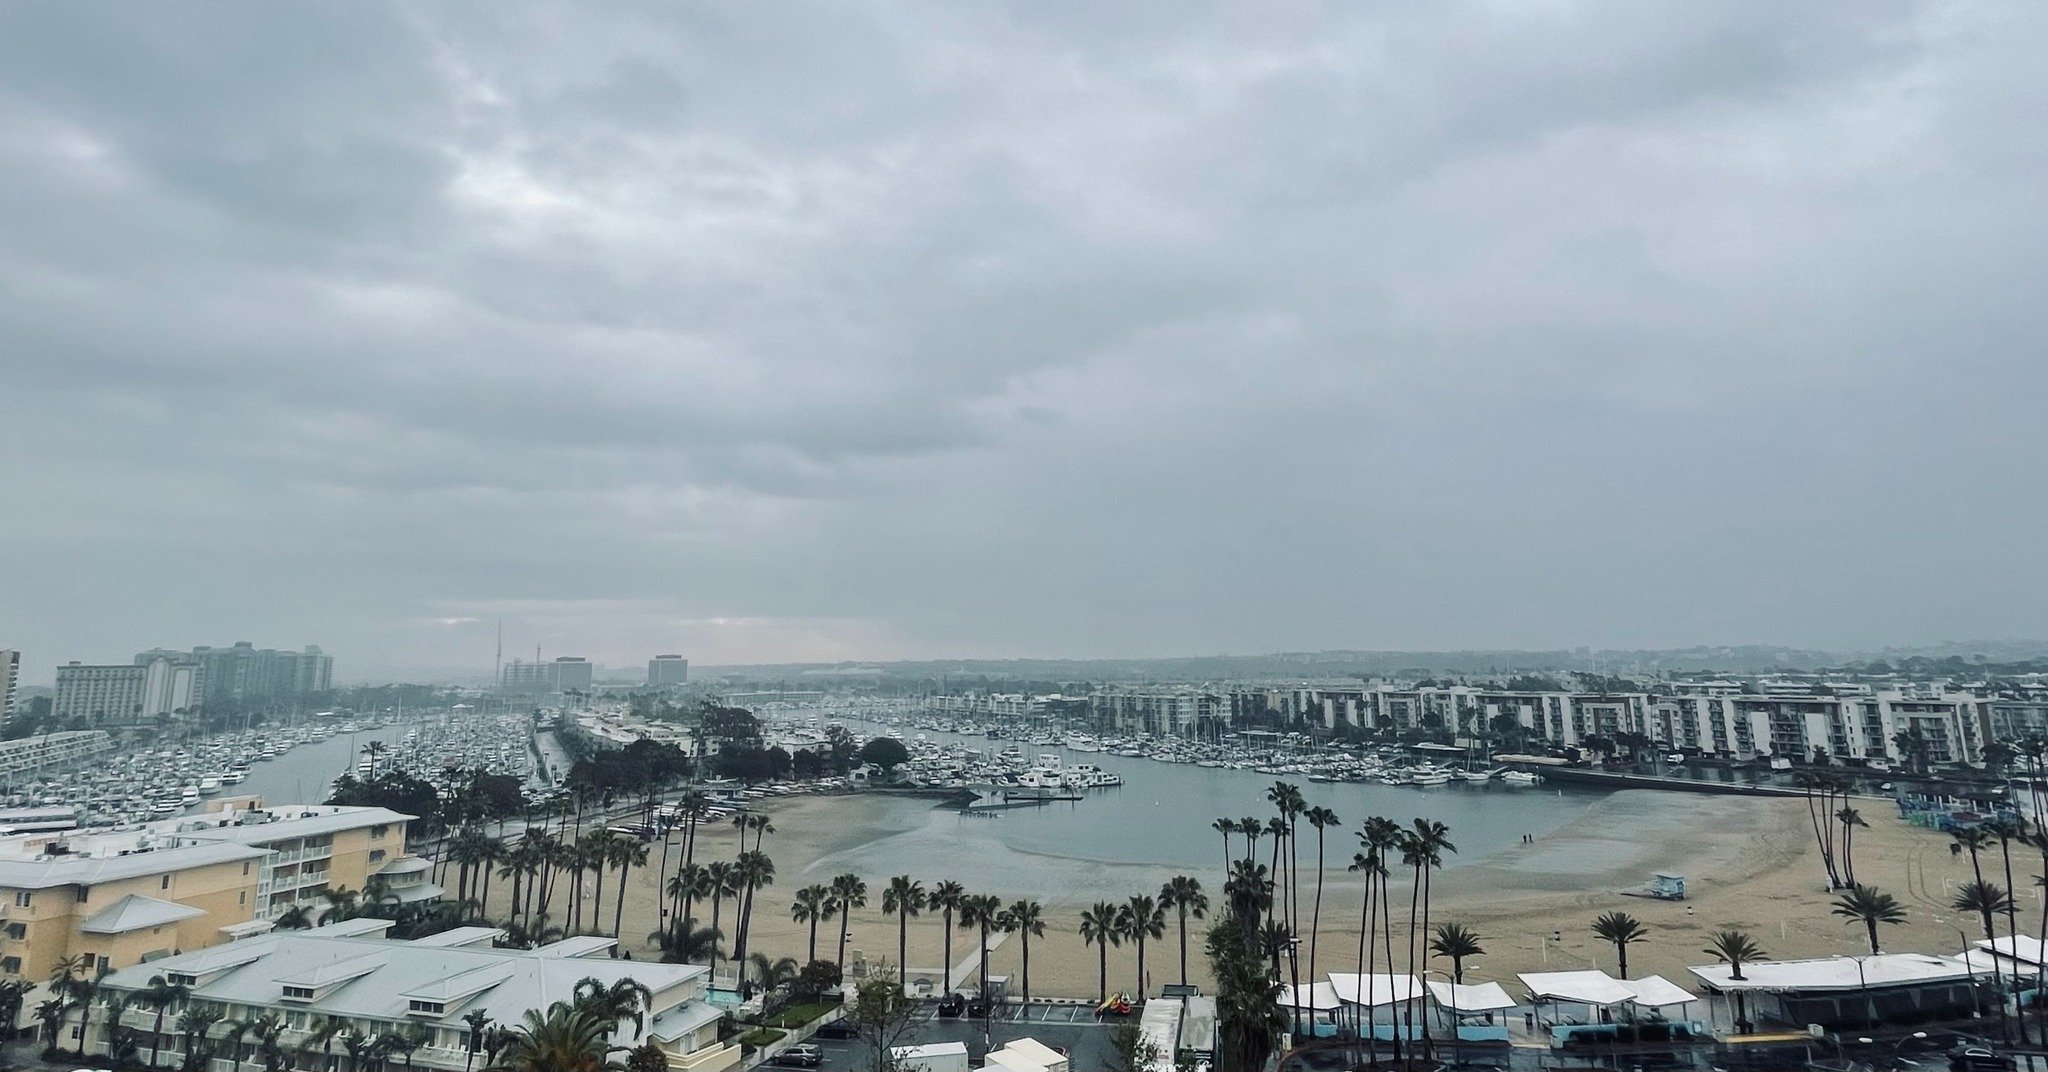 Rainy morning in Marina del Rey, where I wandered to yesterday to continue celebrating Bree's birthday after last week in Atlanta. Today we meander over to Death Valley, where we've never been, to see the giant lake that has formed there as a result 